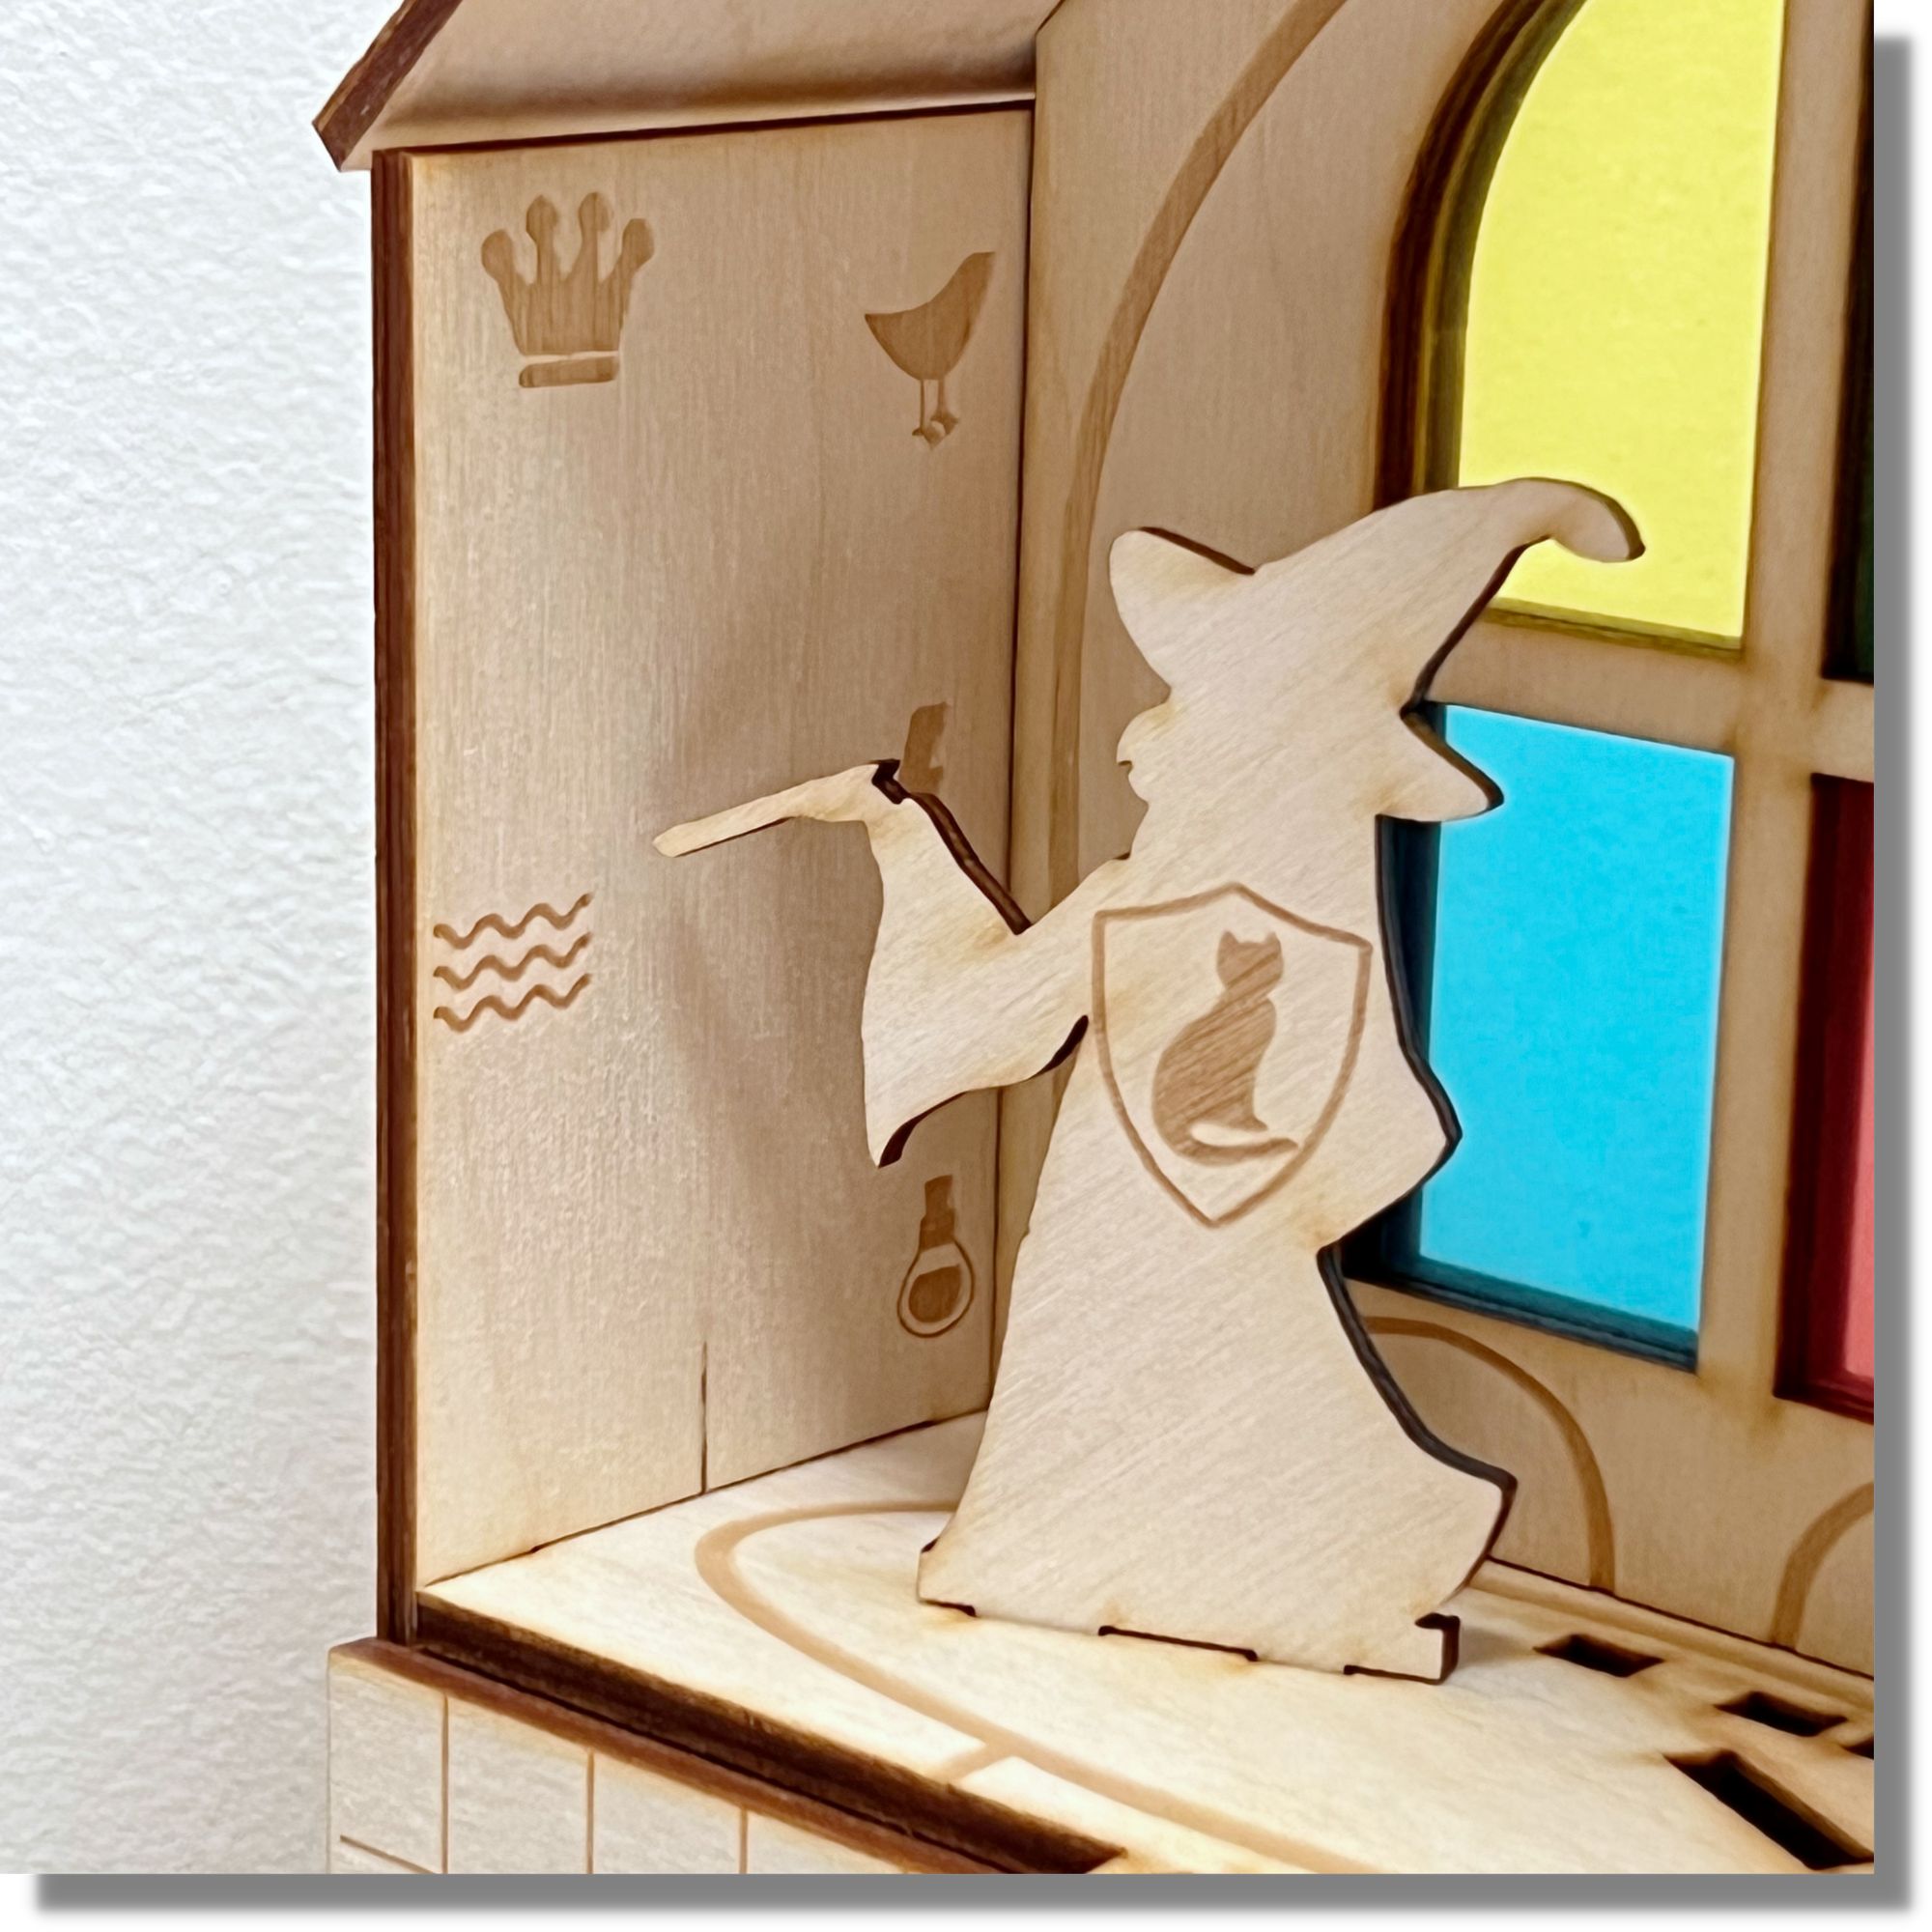 Wooden tower prop with witch avatar inside, included in School of Magic Mystic Case box.